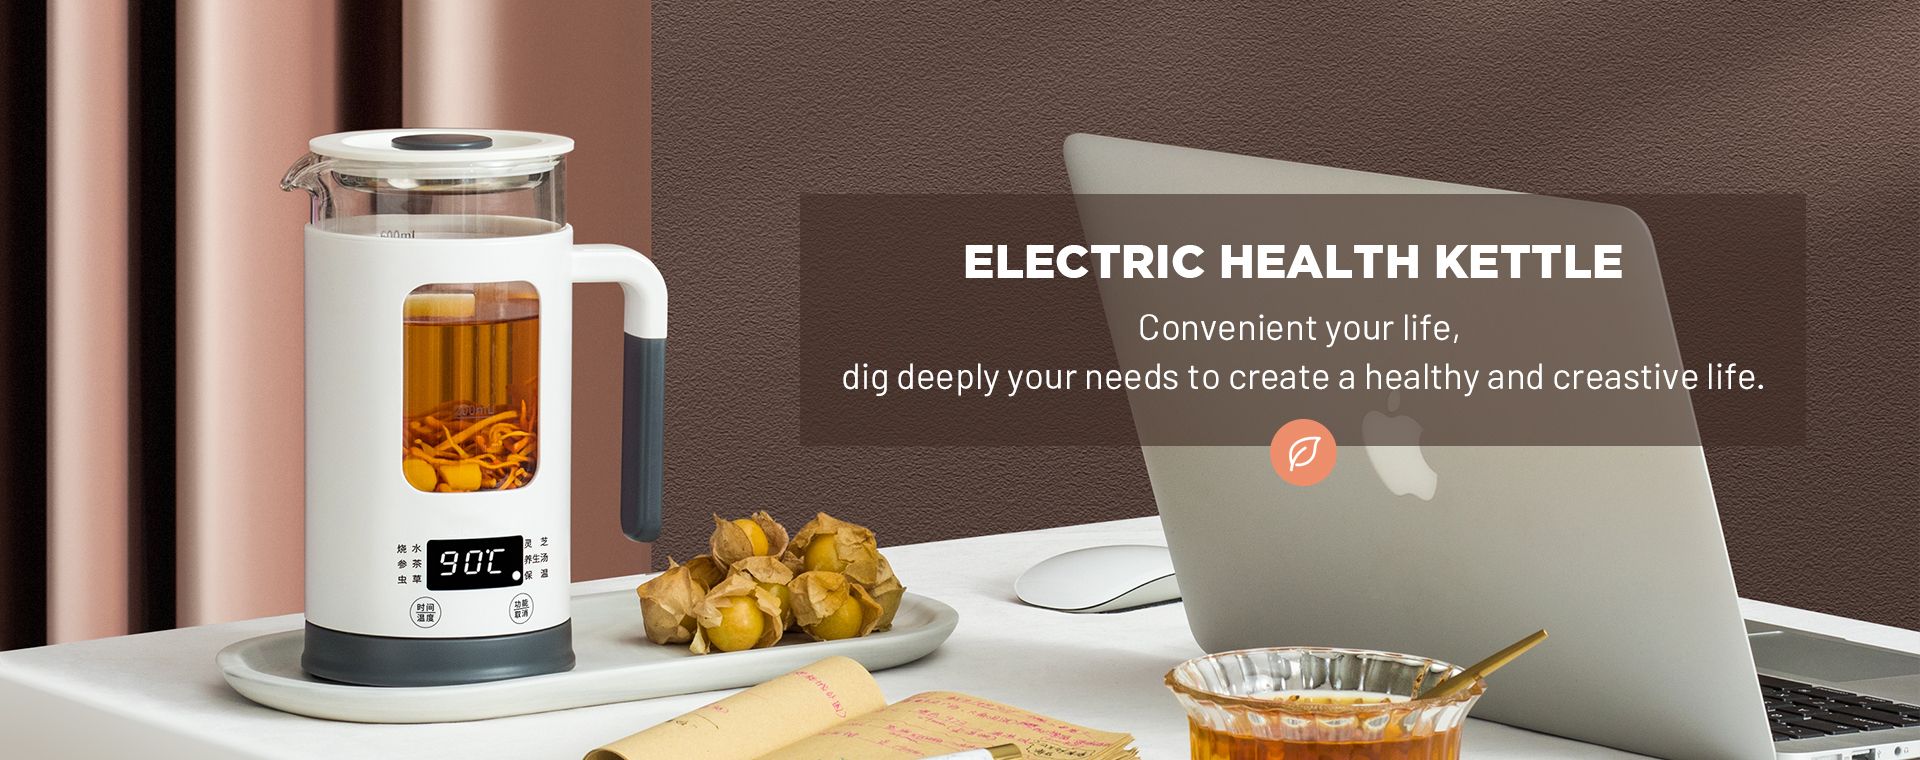 Electric Health Kettle